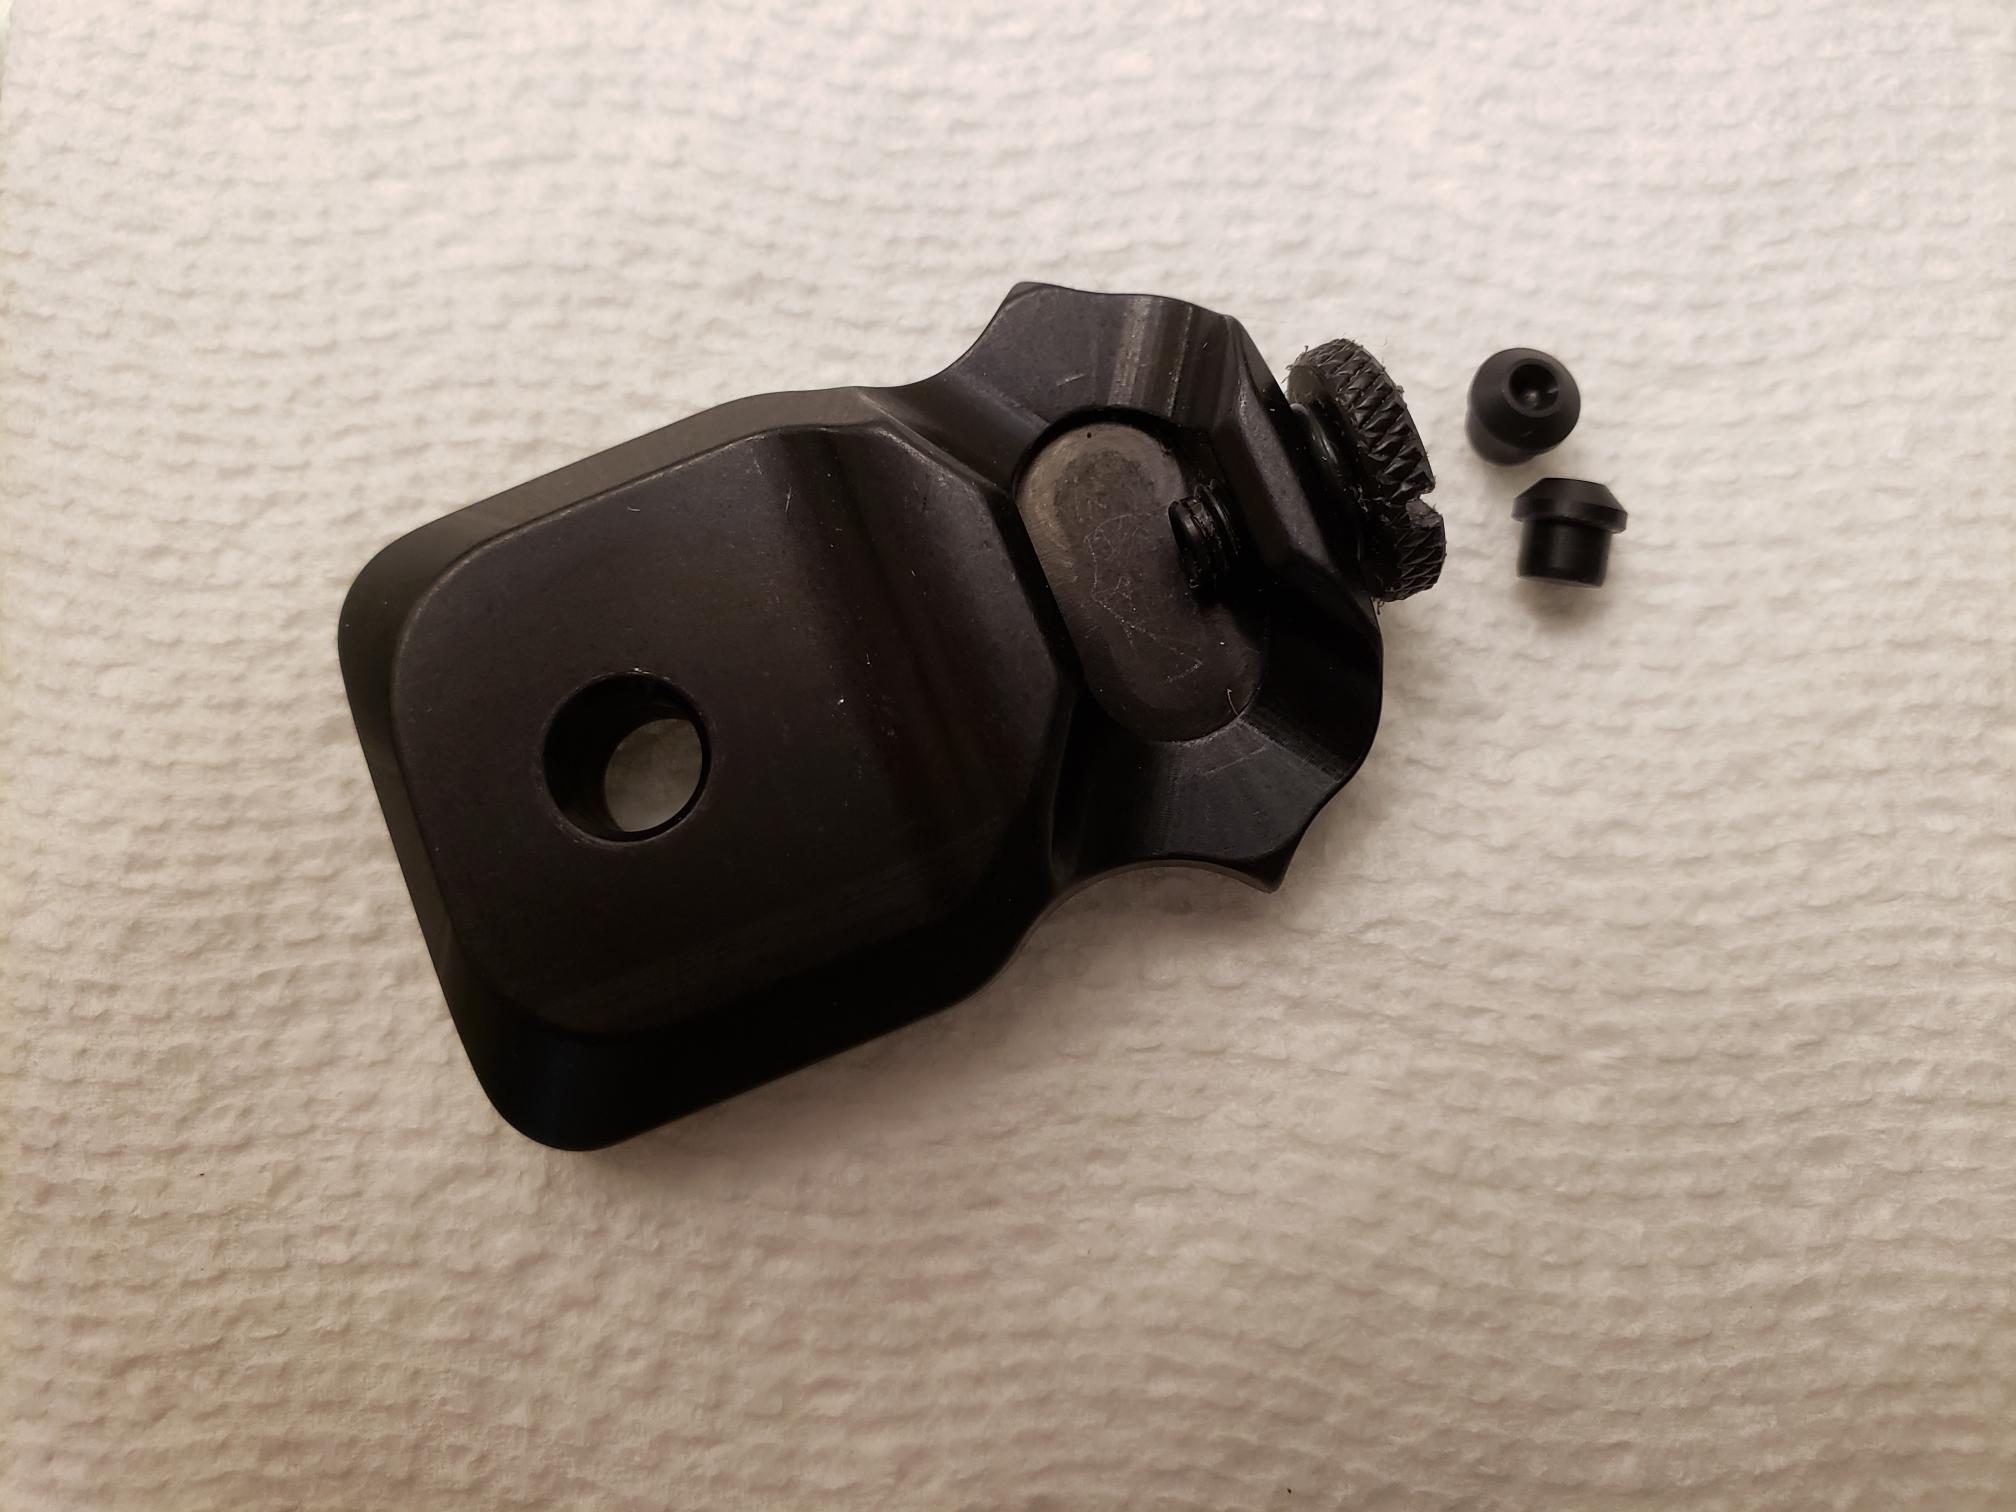 Guide-rod-ball-end-socket-removed